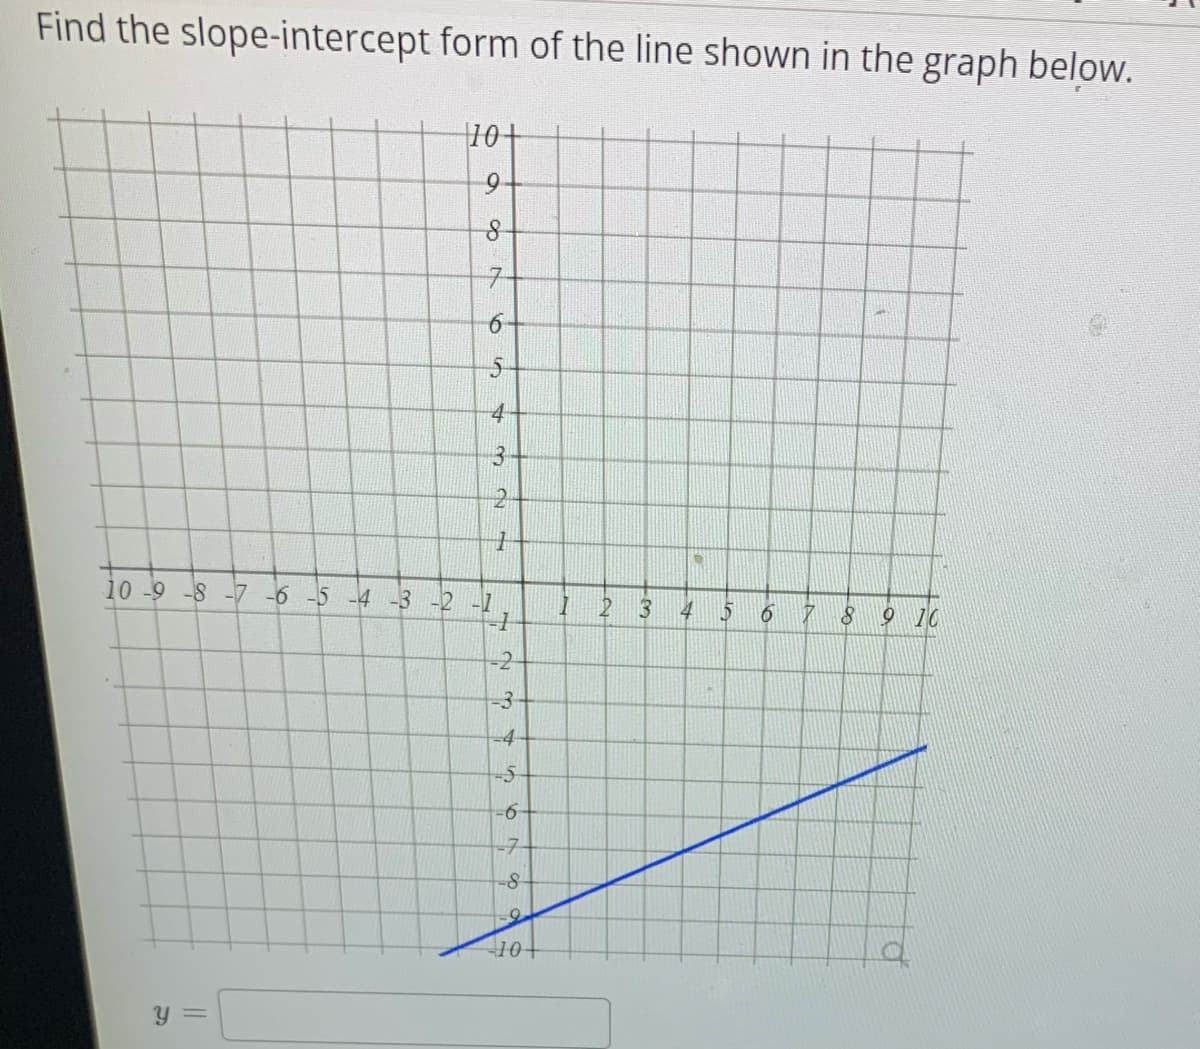 Find the slope-intercept form of the line shown in the graph below.
|10+
7.
4
3.
10 -9 -8 -7 -6 -5 -4 -3 -2 -1
4
9 10
-2-
-3-
-4
-7
10+
